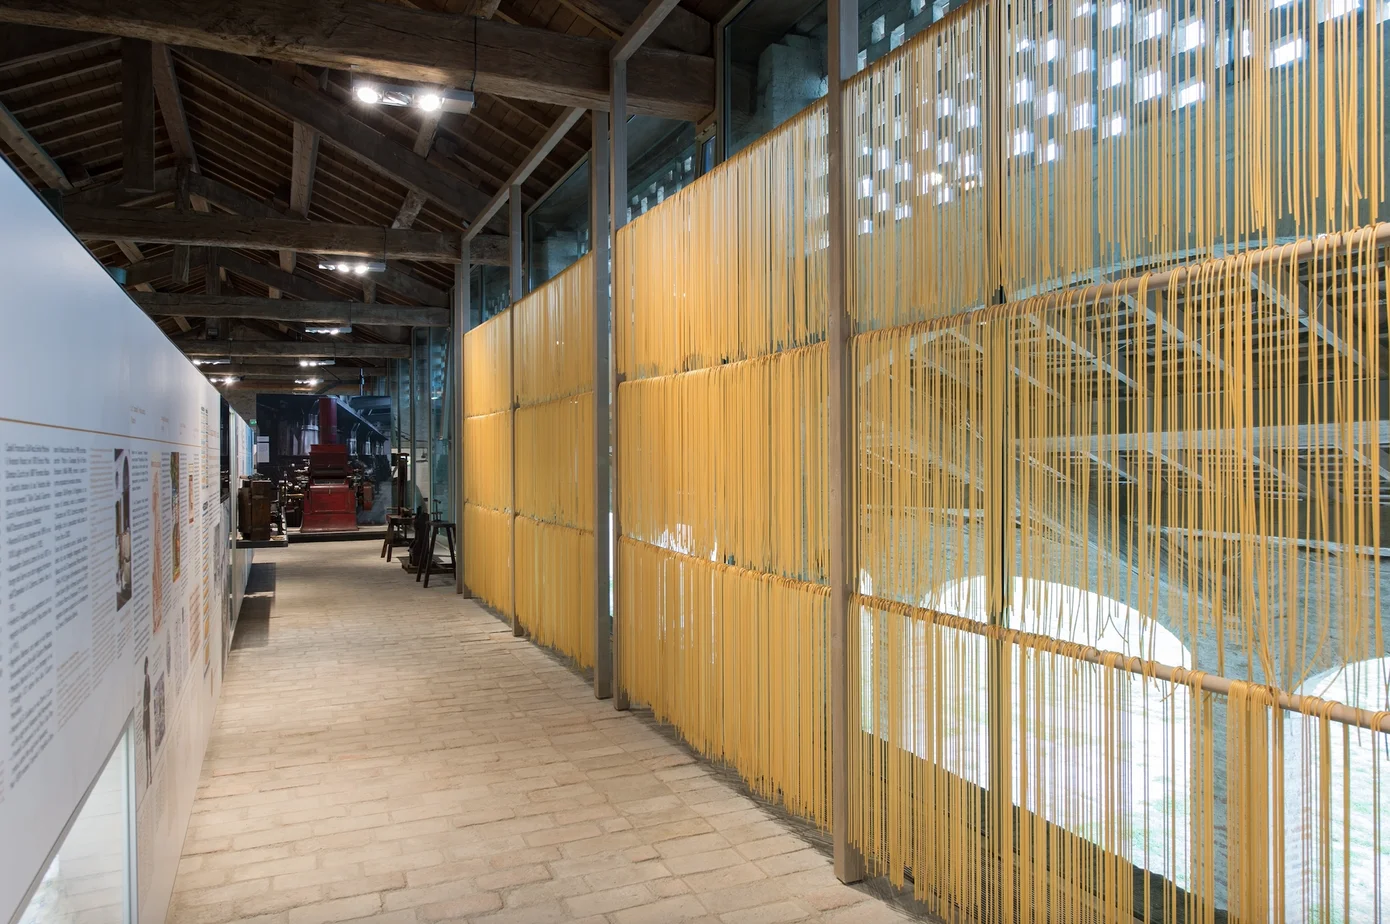 Fresh pasta gets dried by hanging on special racks. Here pictured a golden wall of drying spaghetti at the Pasta Museum.